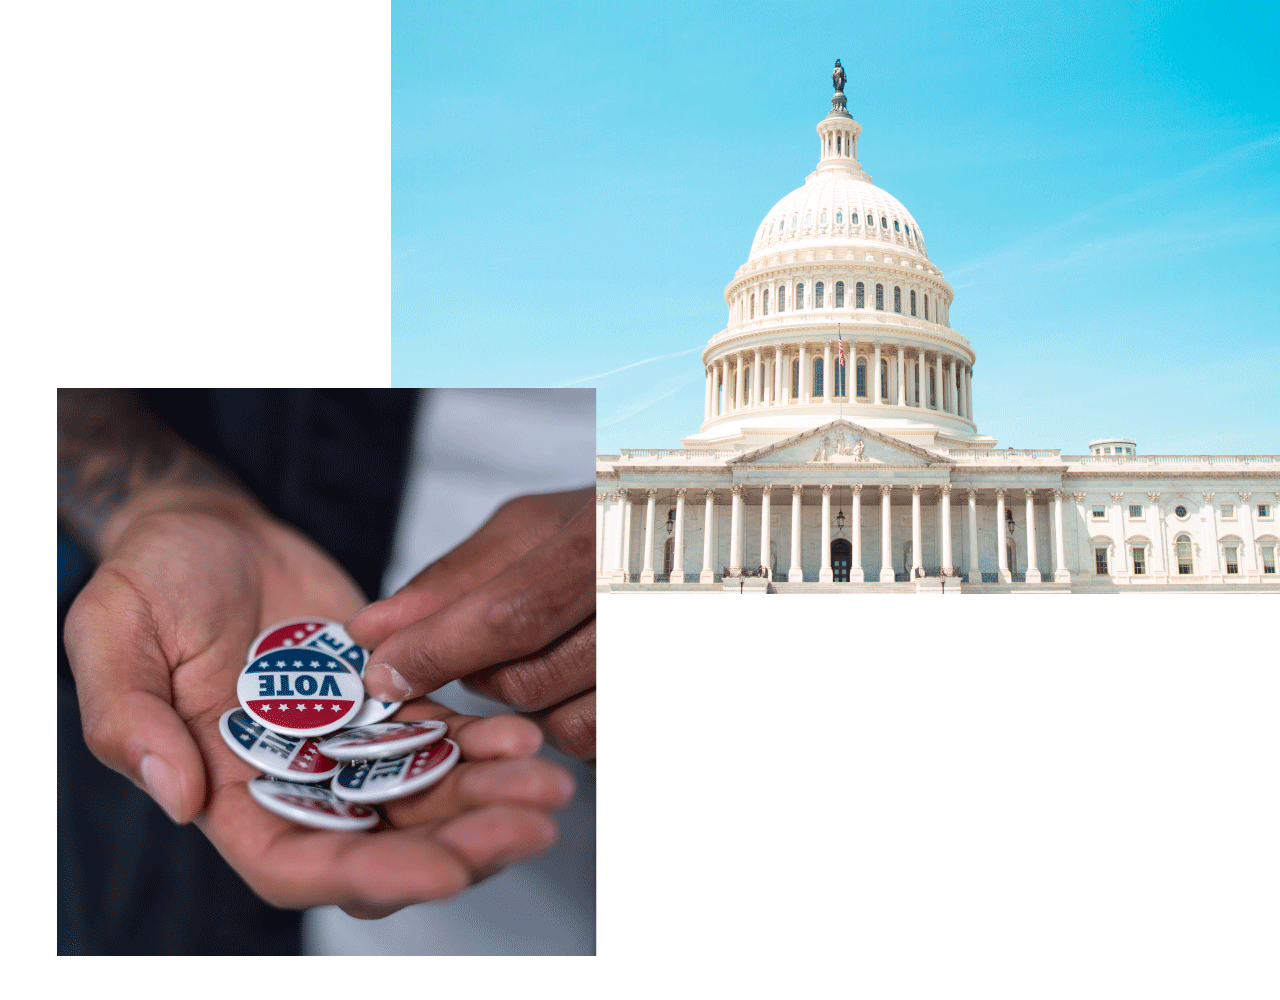 A collage of two images: 1) A hand holding a collection of buttons that say vote. 2) The United States Capitol building.